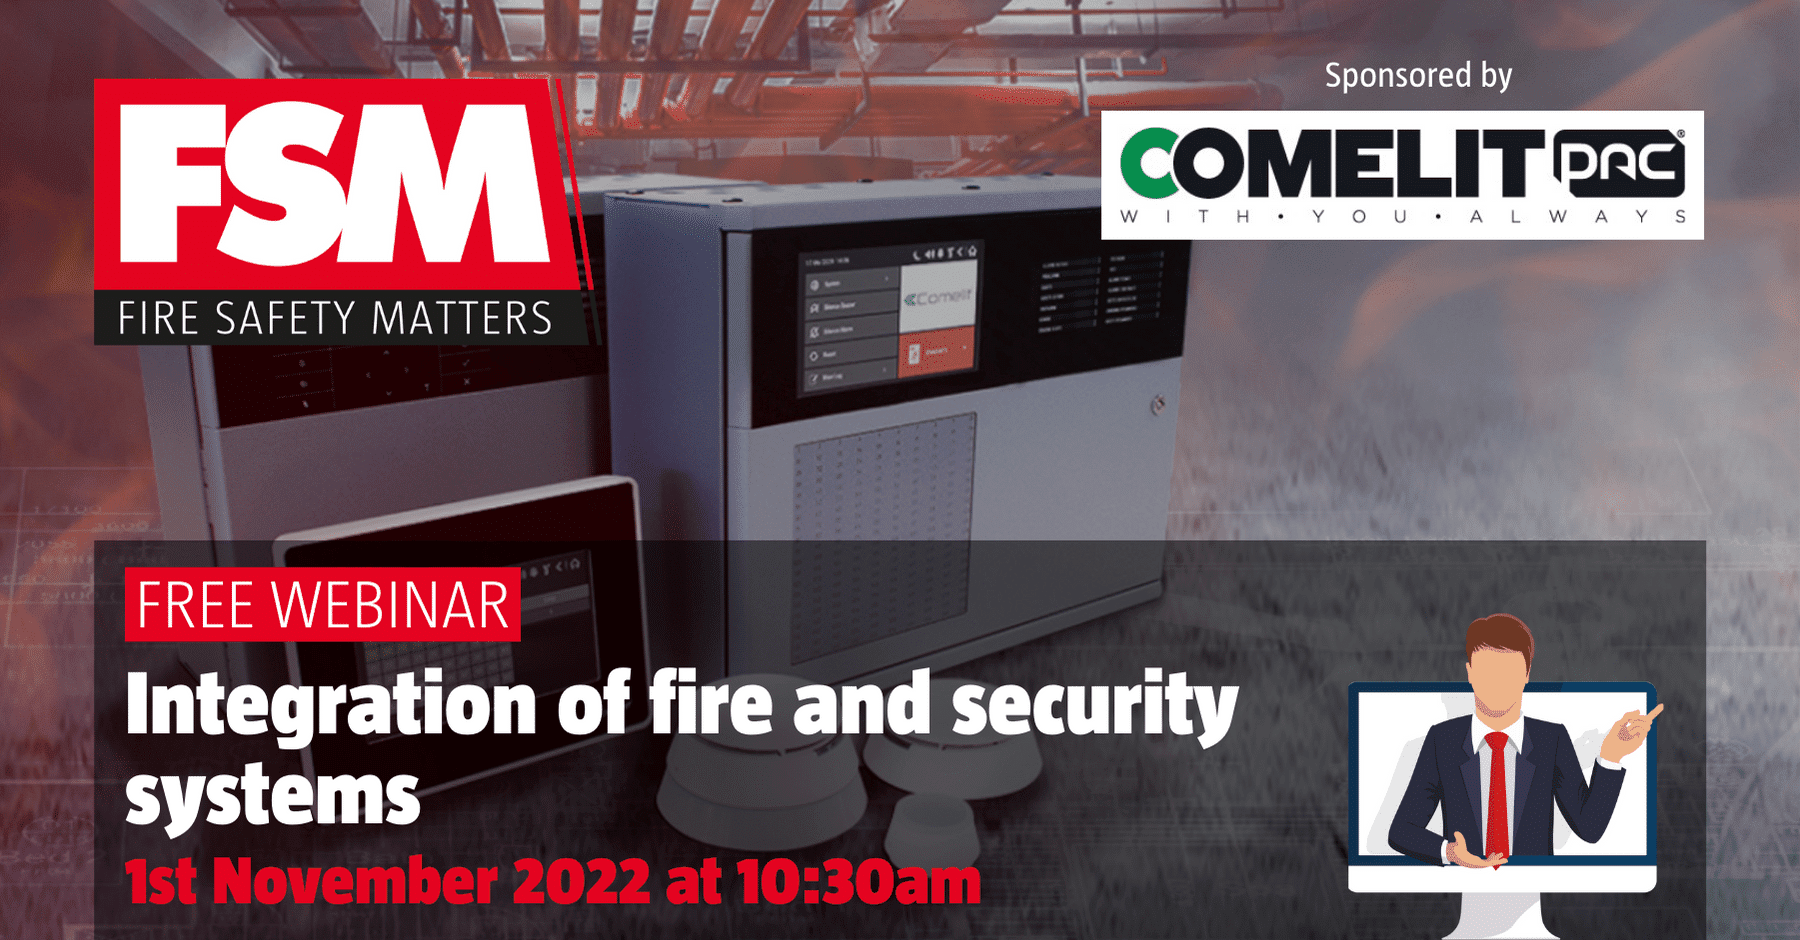 FSM Webinar with Comelit-PAC